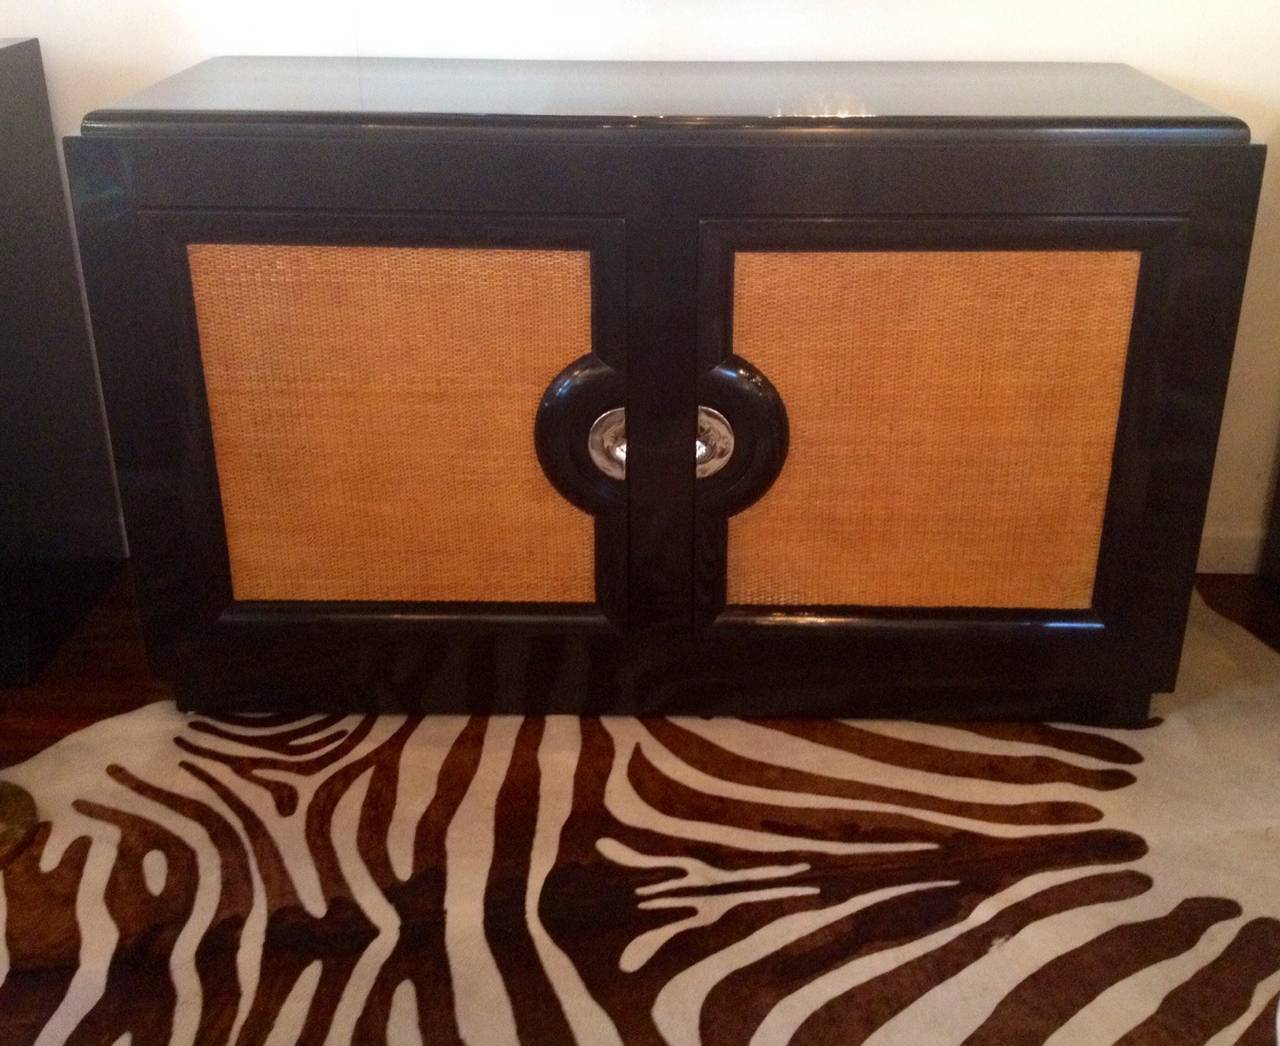 Paul Laszlo cane front small-scale sideboard in black lacquer with nickel polish.
She'd pulls.